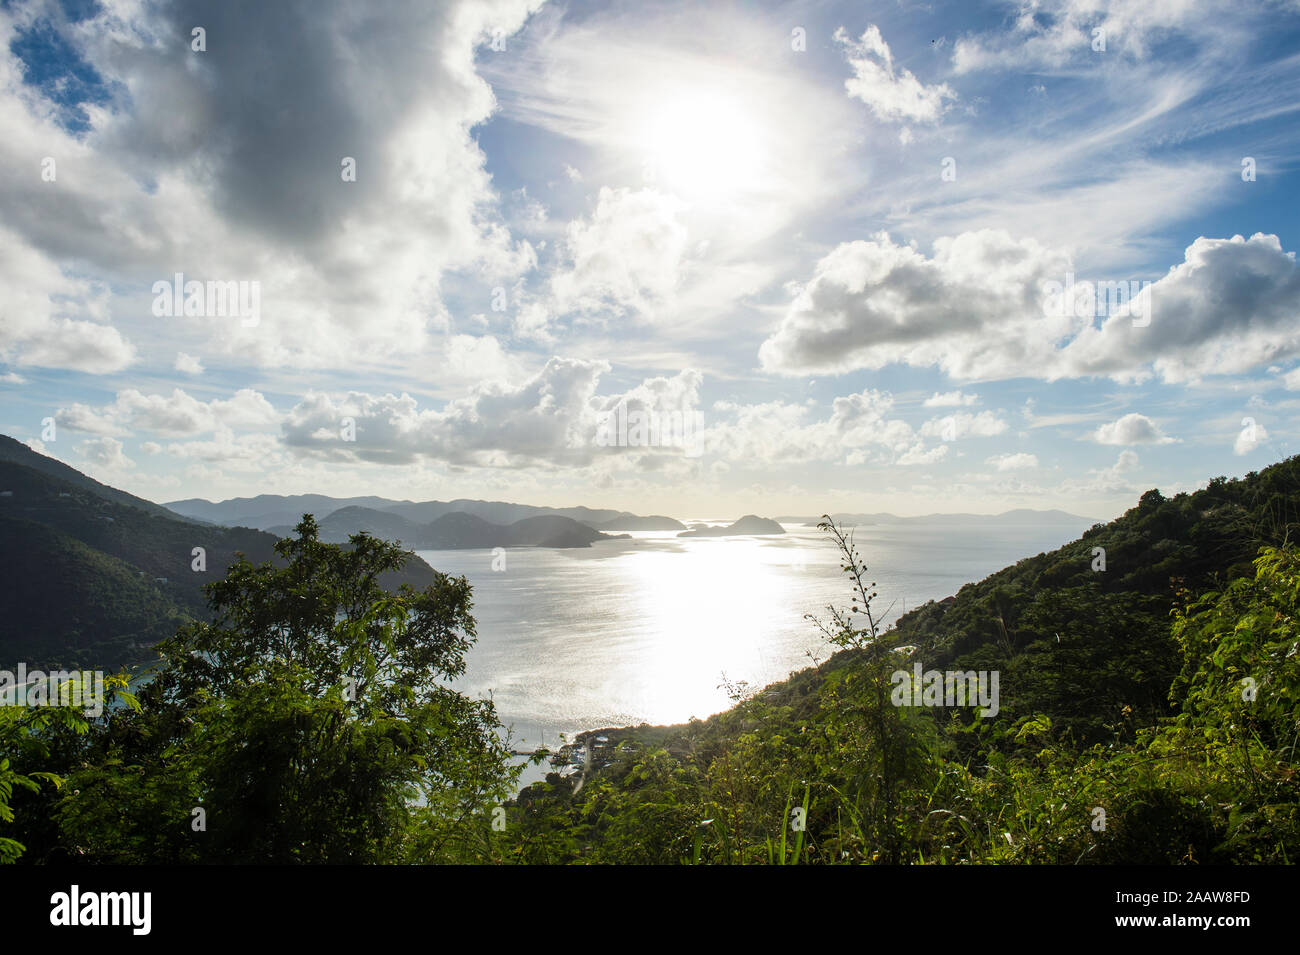 Scenic view of British Virgin Islands against cloudy sky during sunny day Stock Photo